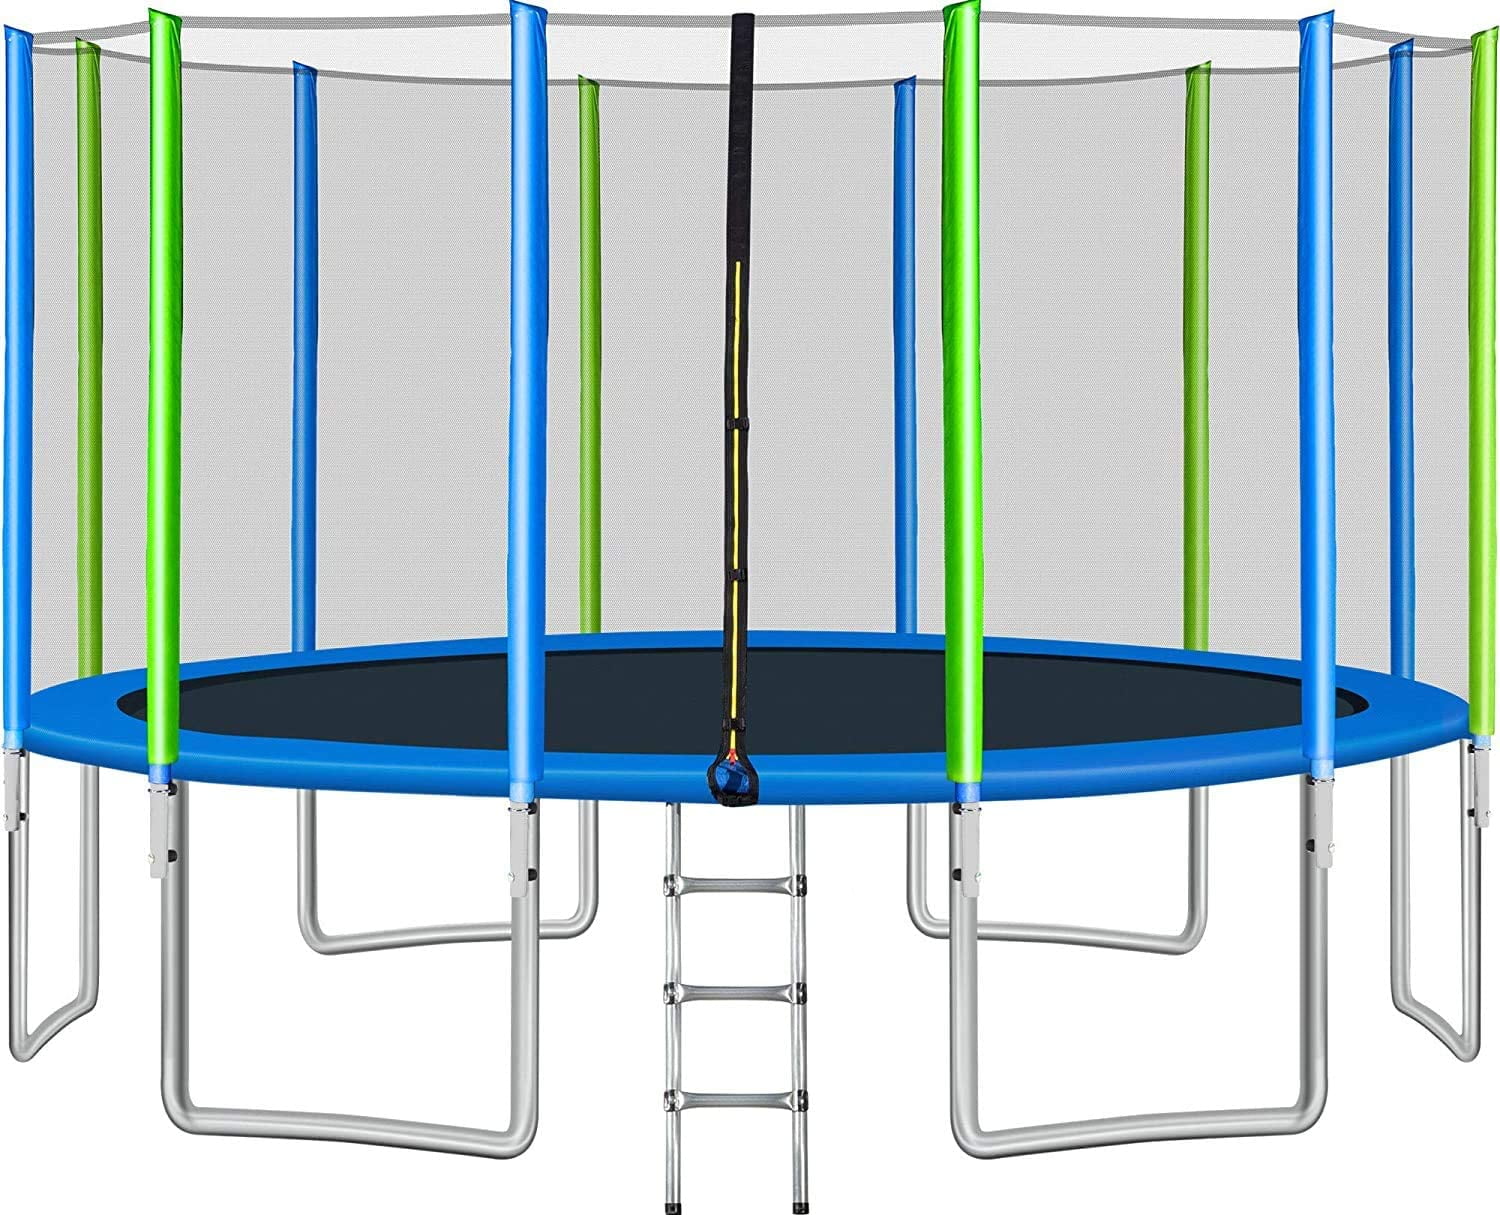 Lemonbest Heavy Duty Trampoline with Enclosure Net for Kids Spring Cover Ladder Combo, High Weight Limit Outdoor Trampoline, 16 FT